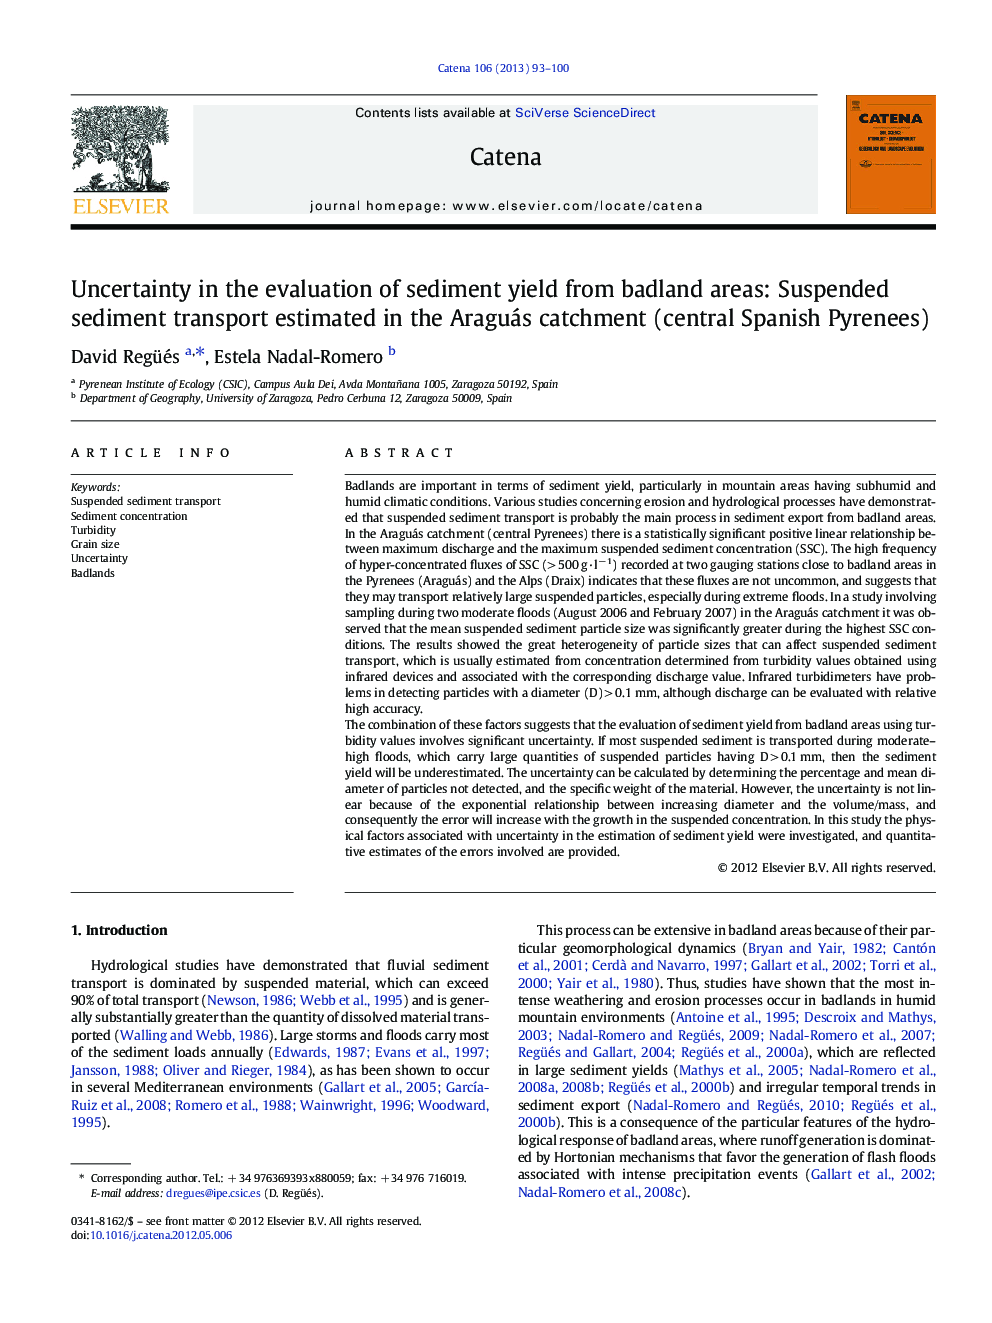 Uncertainty in the evaluation of sediment yield from badland areas: Suspended sediment transport estimated in the Araguás catchment (central Spanish Pyrenees)